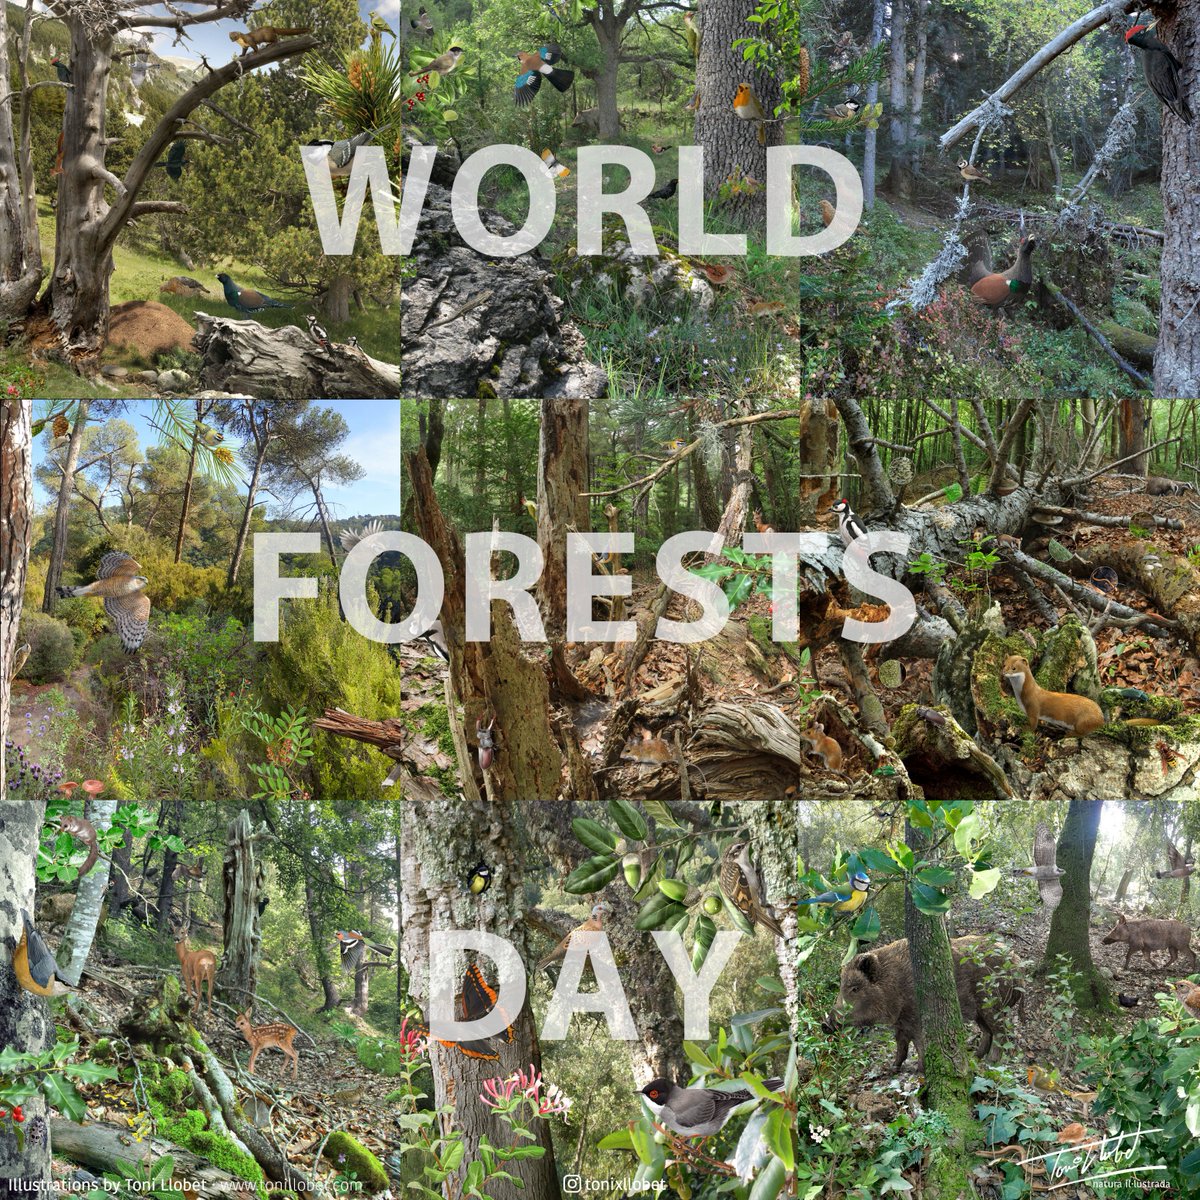 Happy and diverse #WorldForestDay